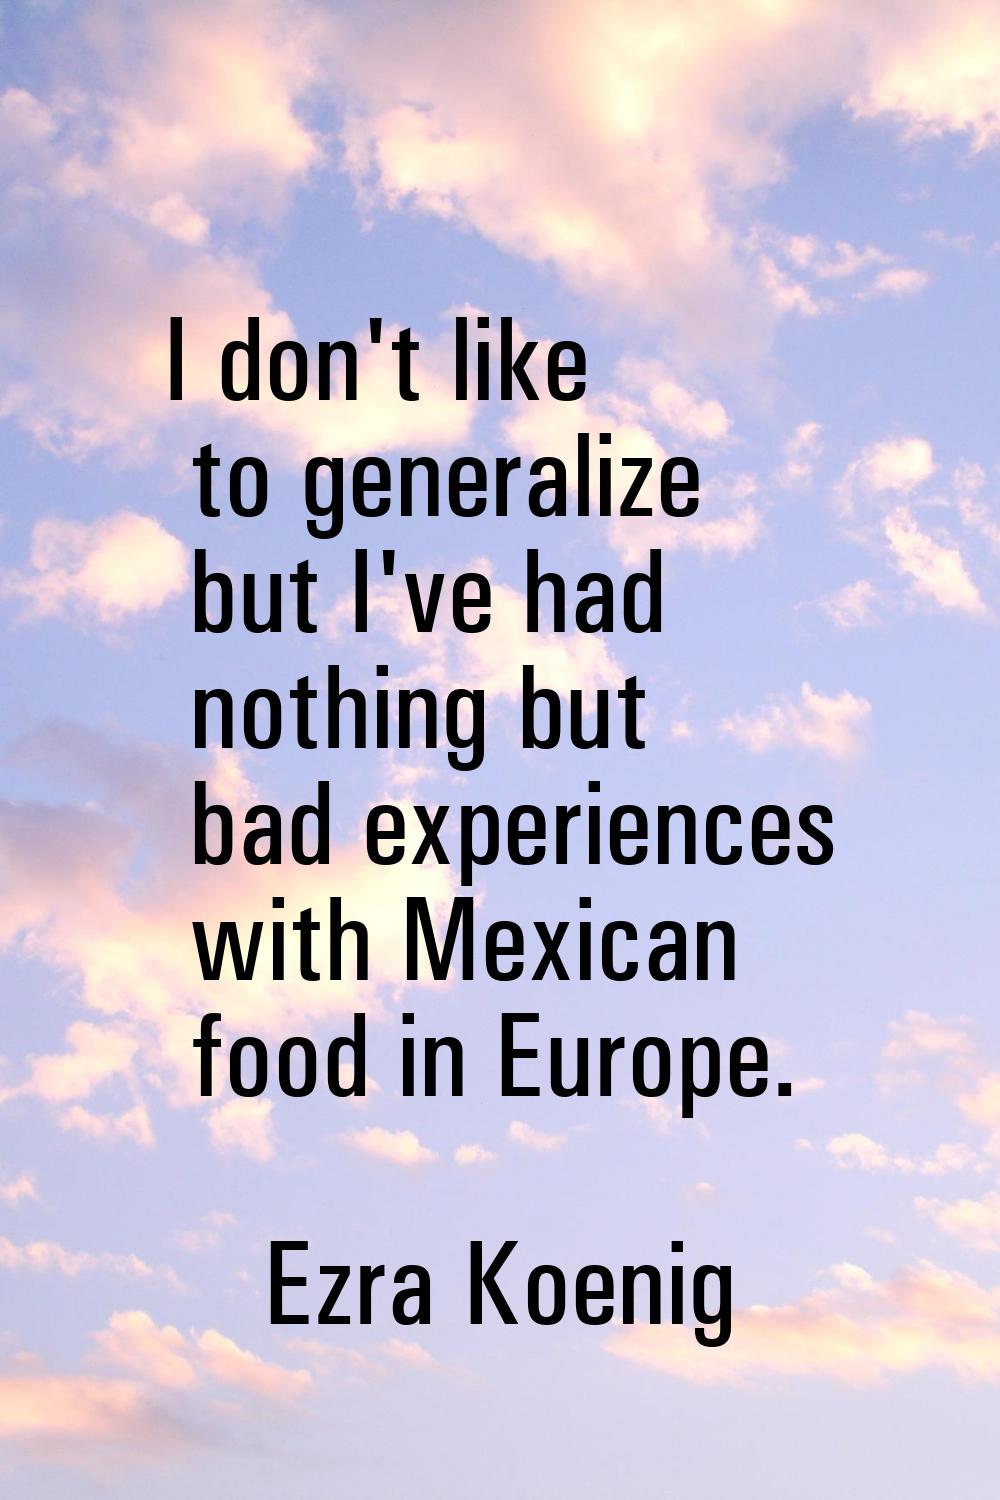 I don't like to generalize but I've had nothing but bad experiences with Mexican food in Europe.